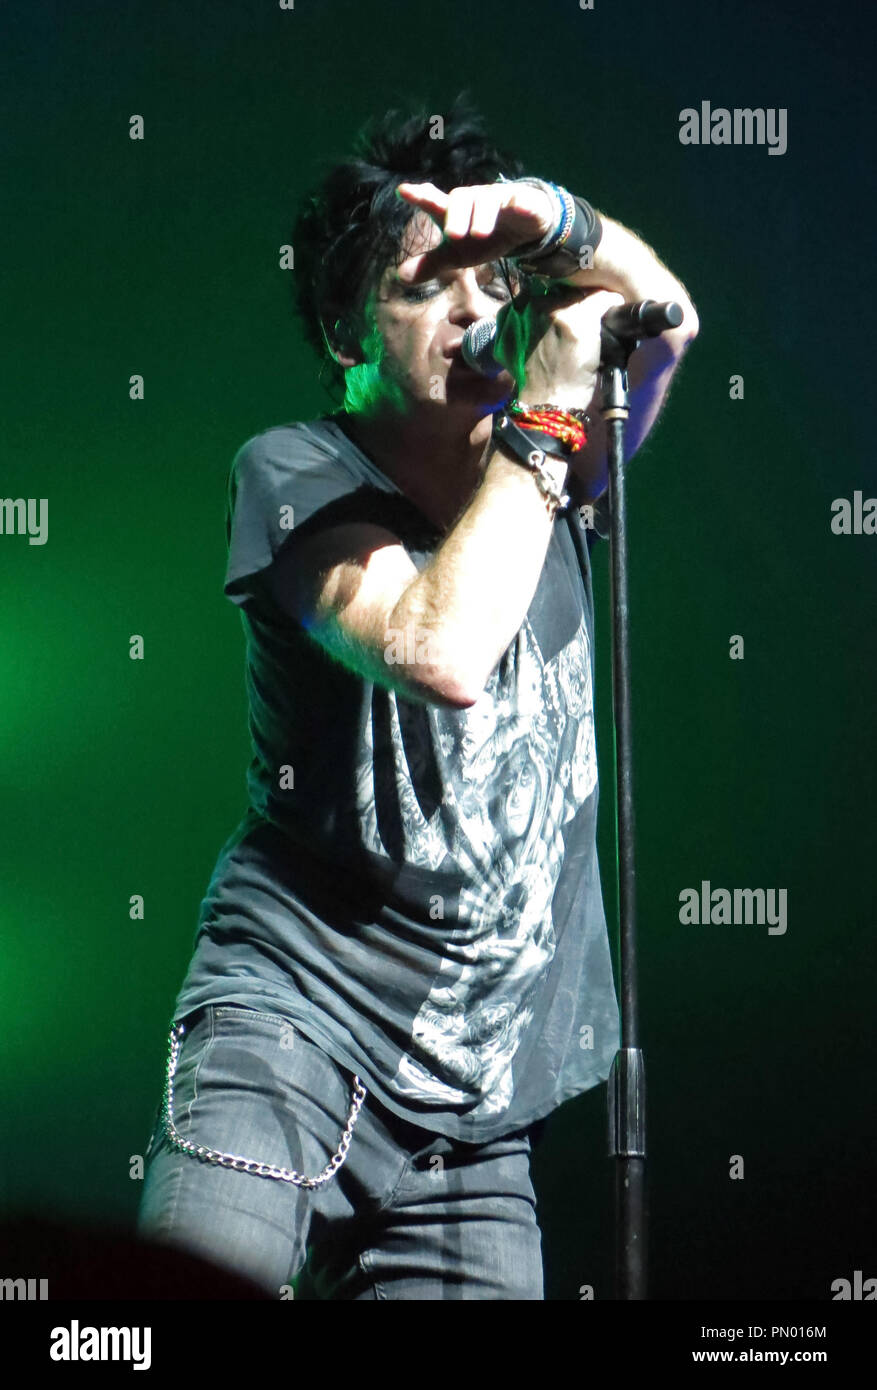 Gary Numan live at The Mayan Theatre in Los Angeles, CA, March 6, 2014. Photo by: Richard Chavez / PictureLux Stock Photo